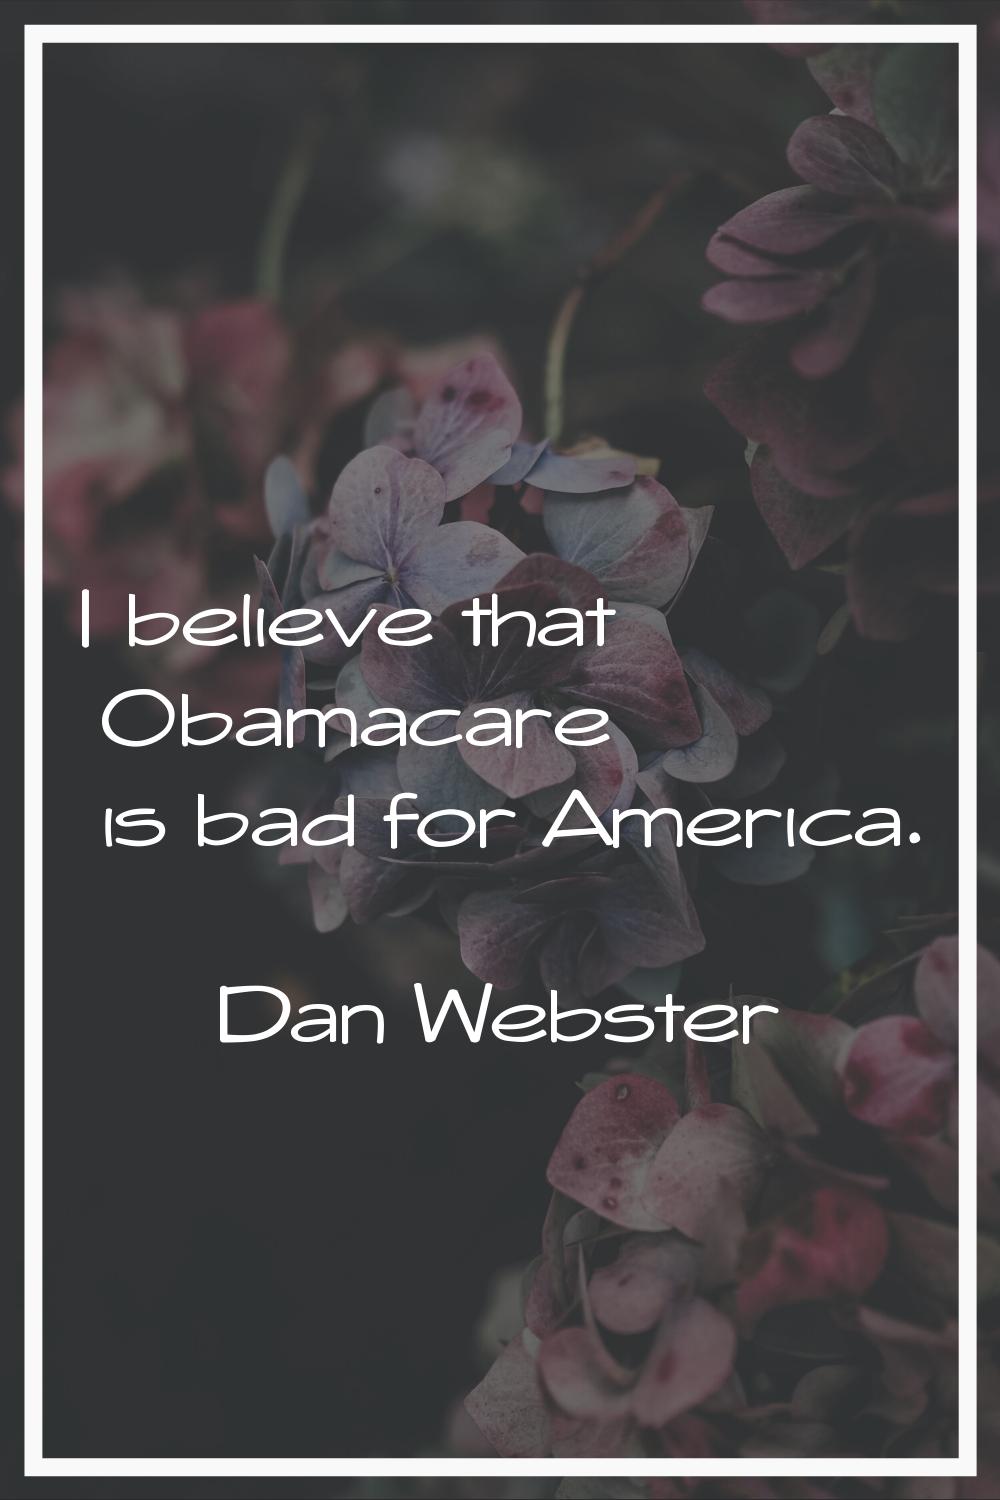 I believe that Obamacare is bad for America.